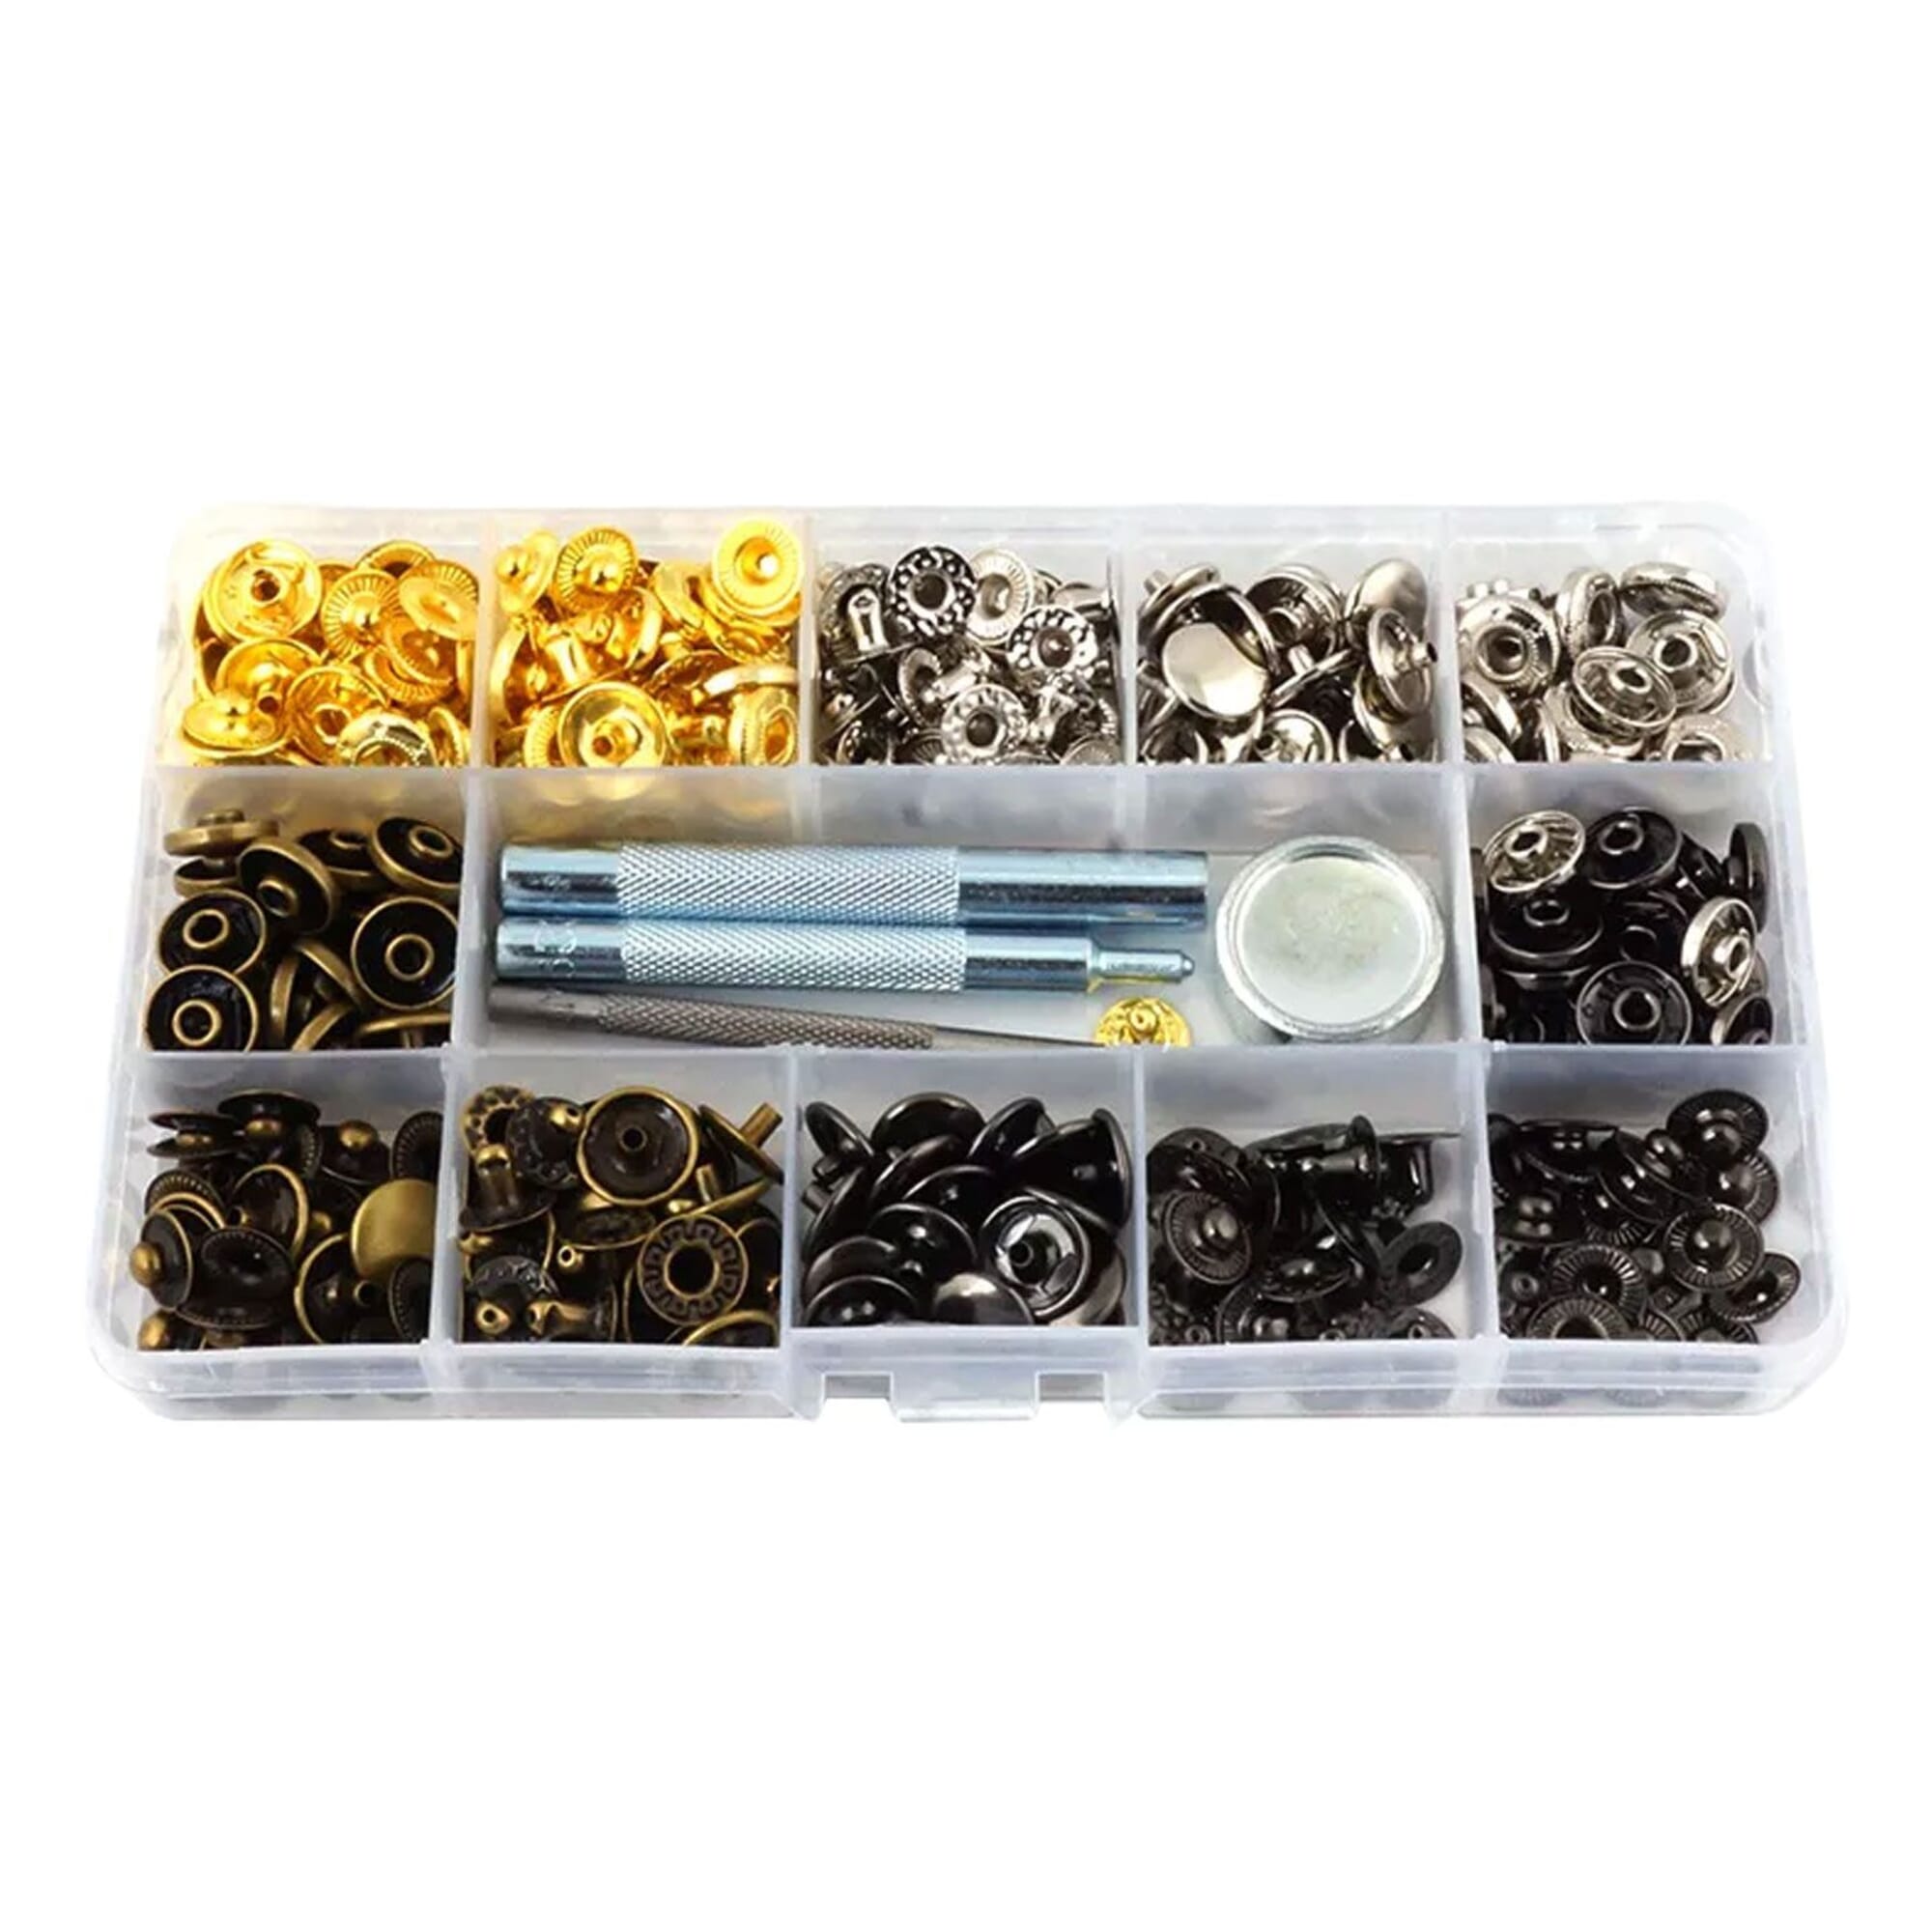 Snap Ring Set50set Snap Fasteners Kit For Leathercraft & Clothing - Iron  Snap Rings With Tools